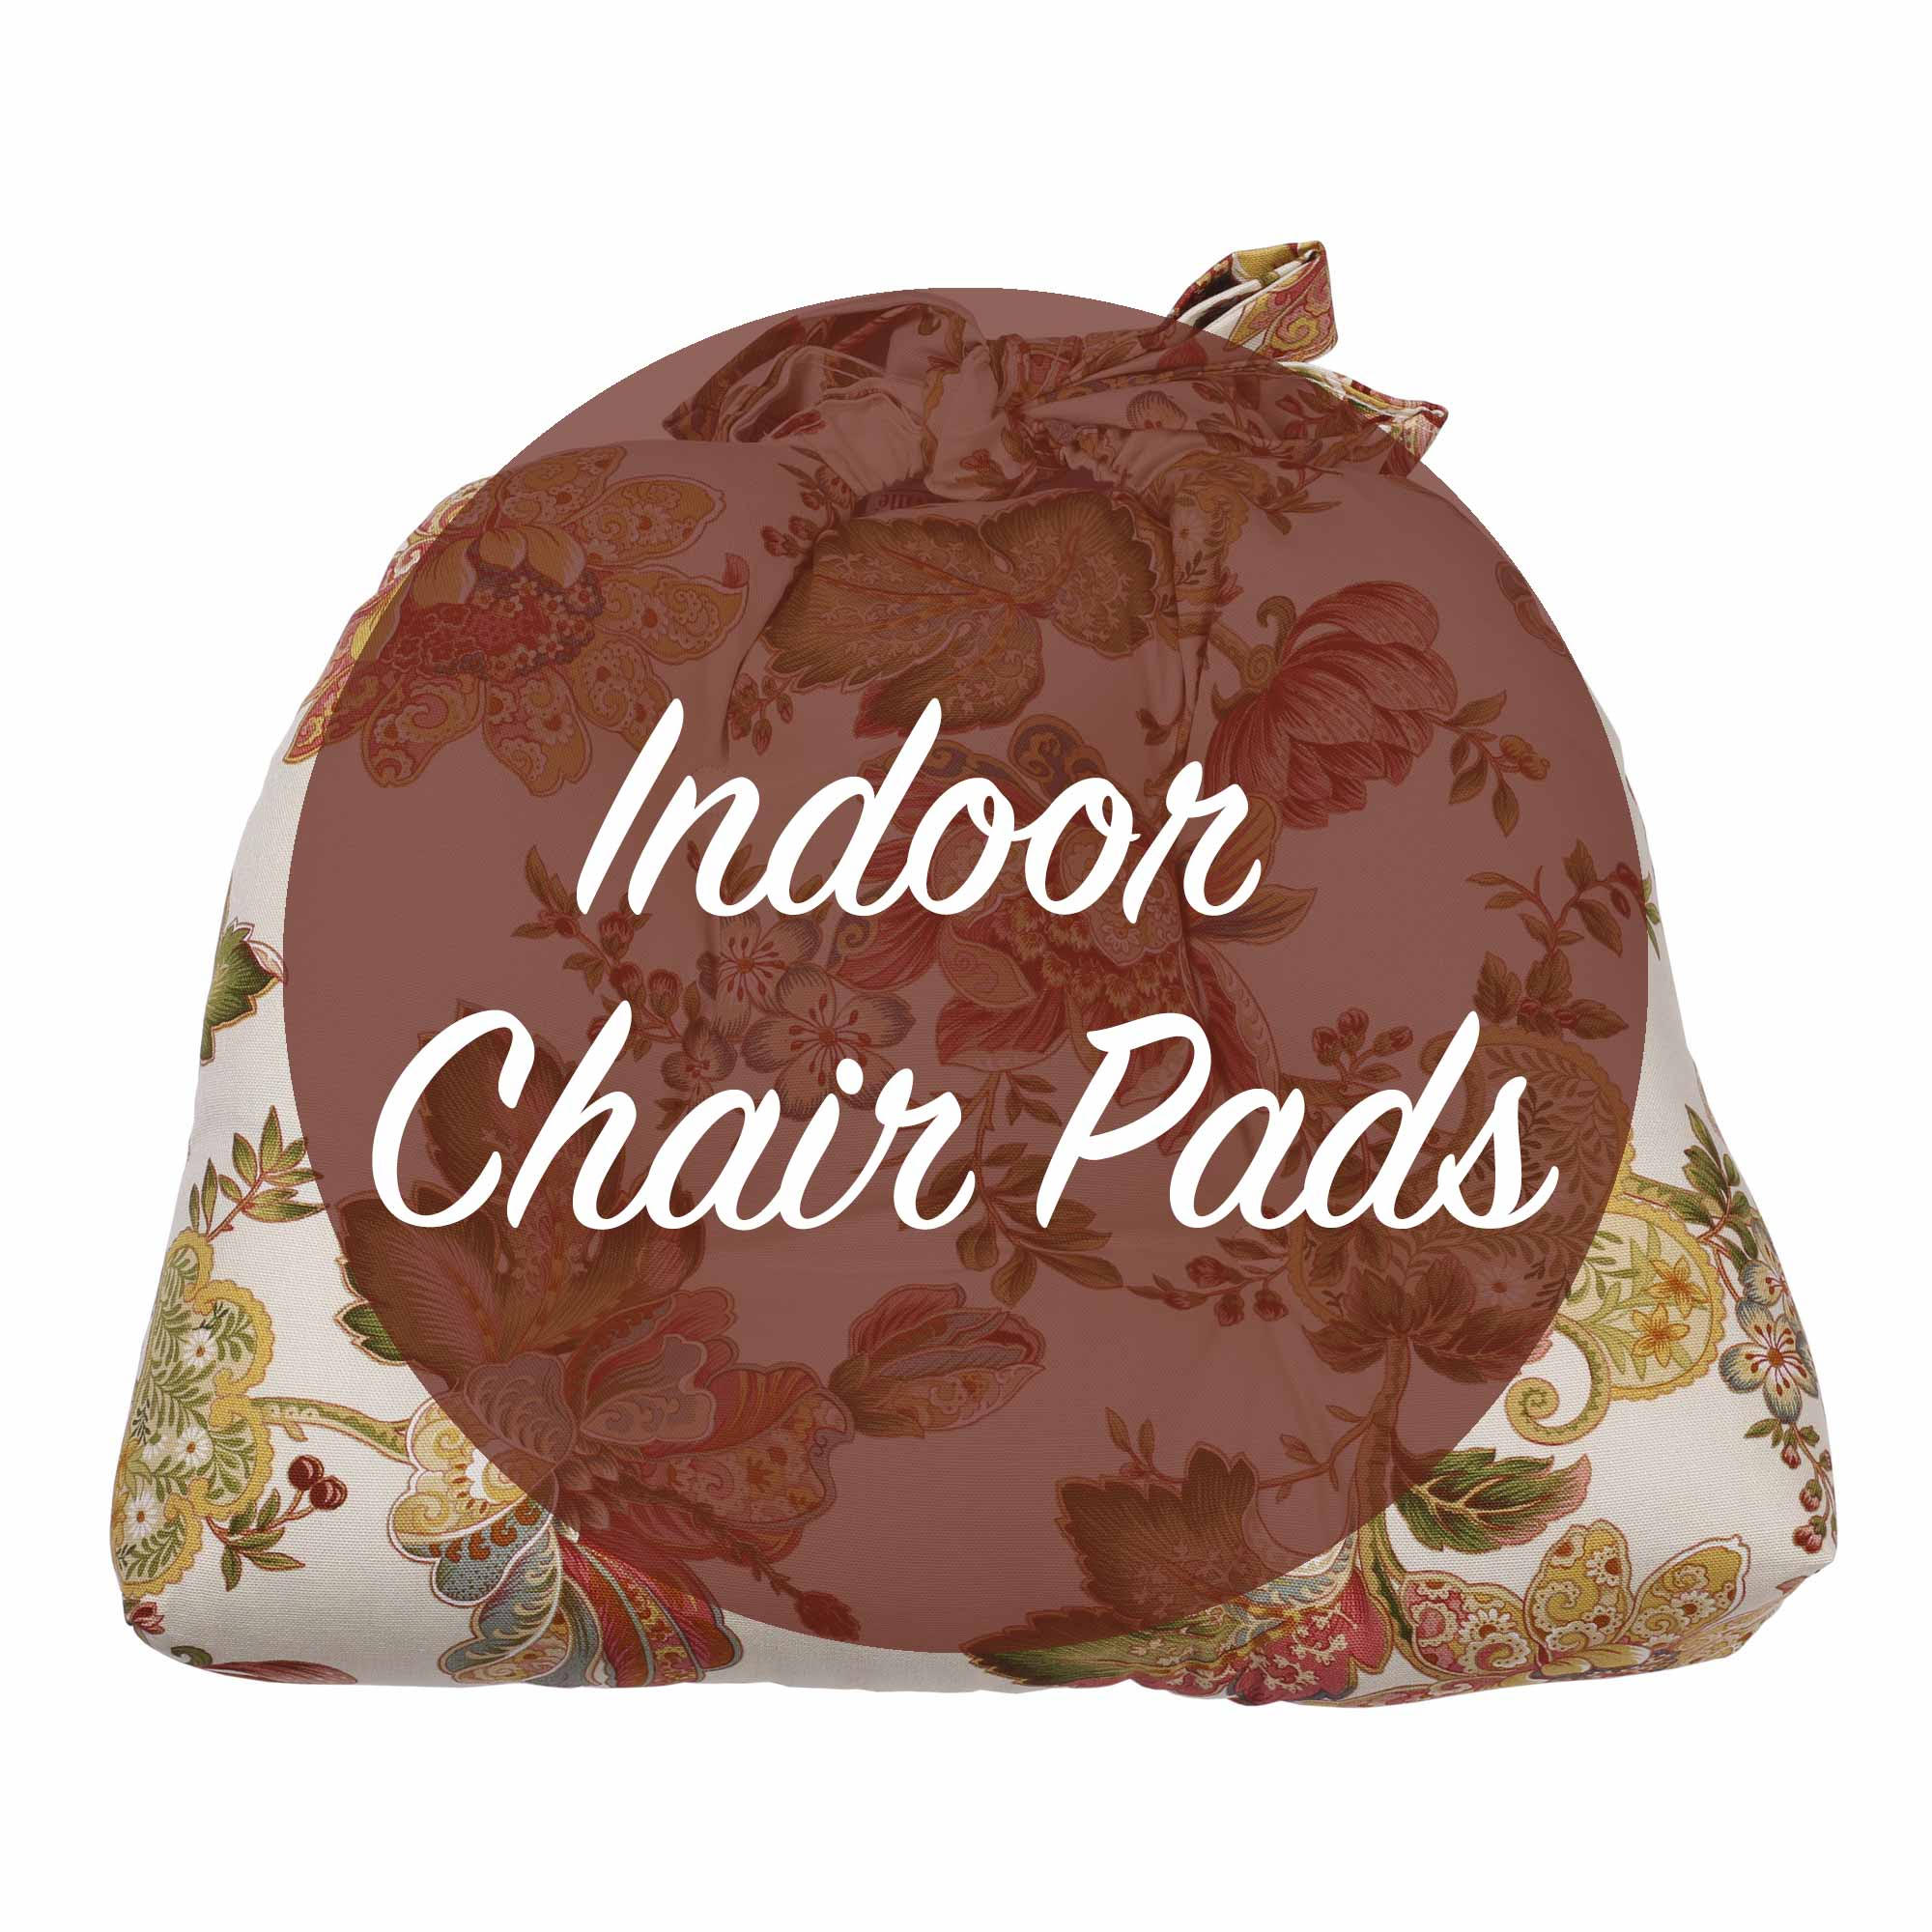 Kitchen Chair pads (Indoor) Archives - Thomasville at Home